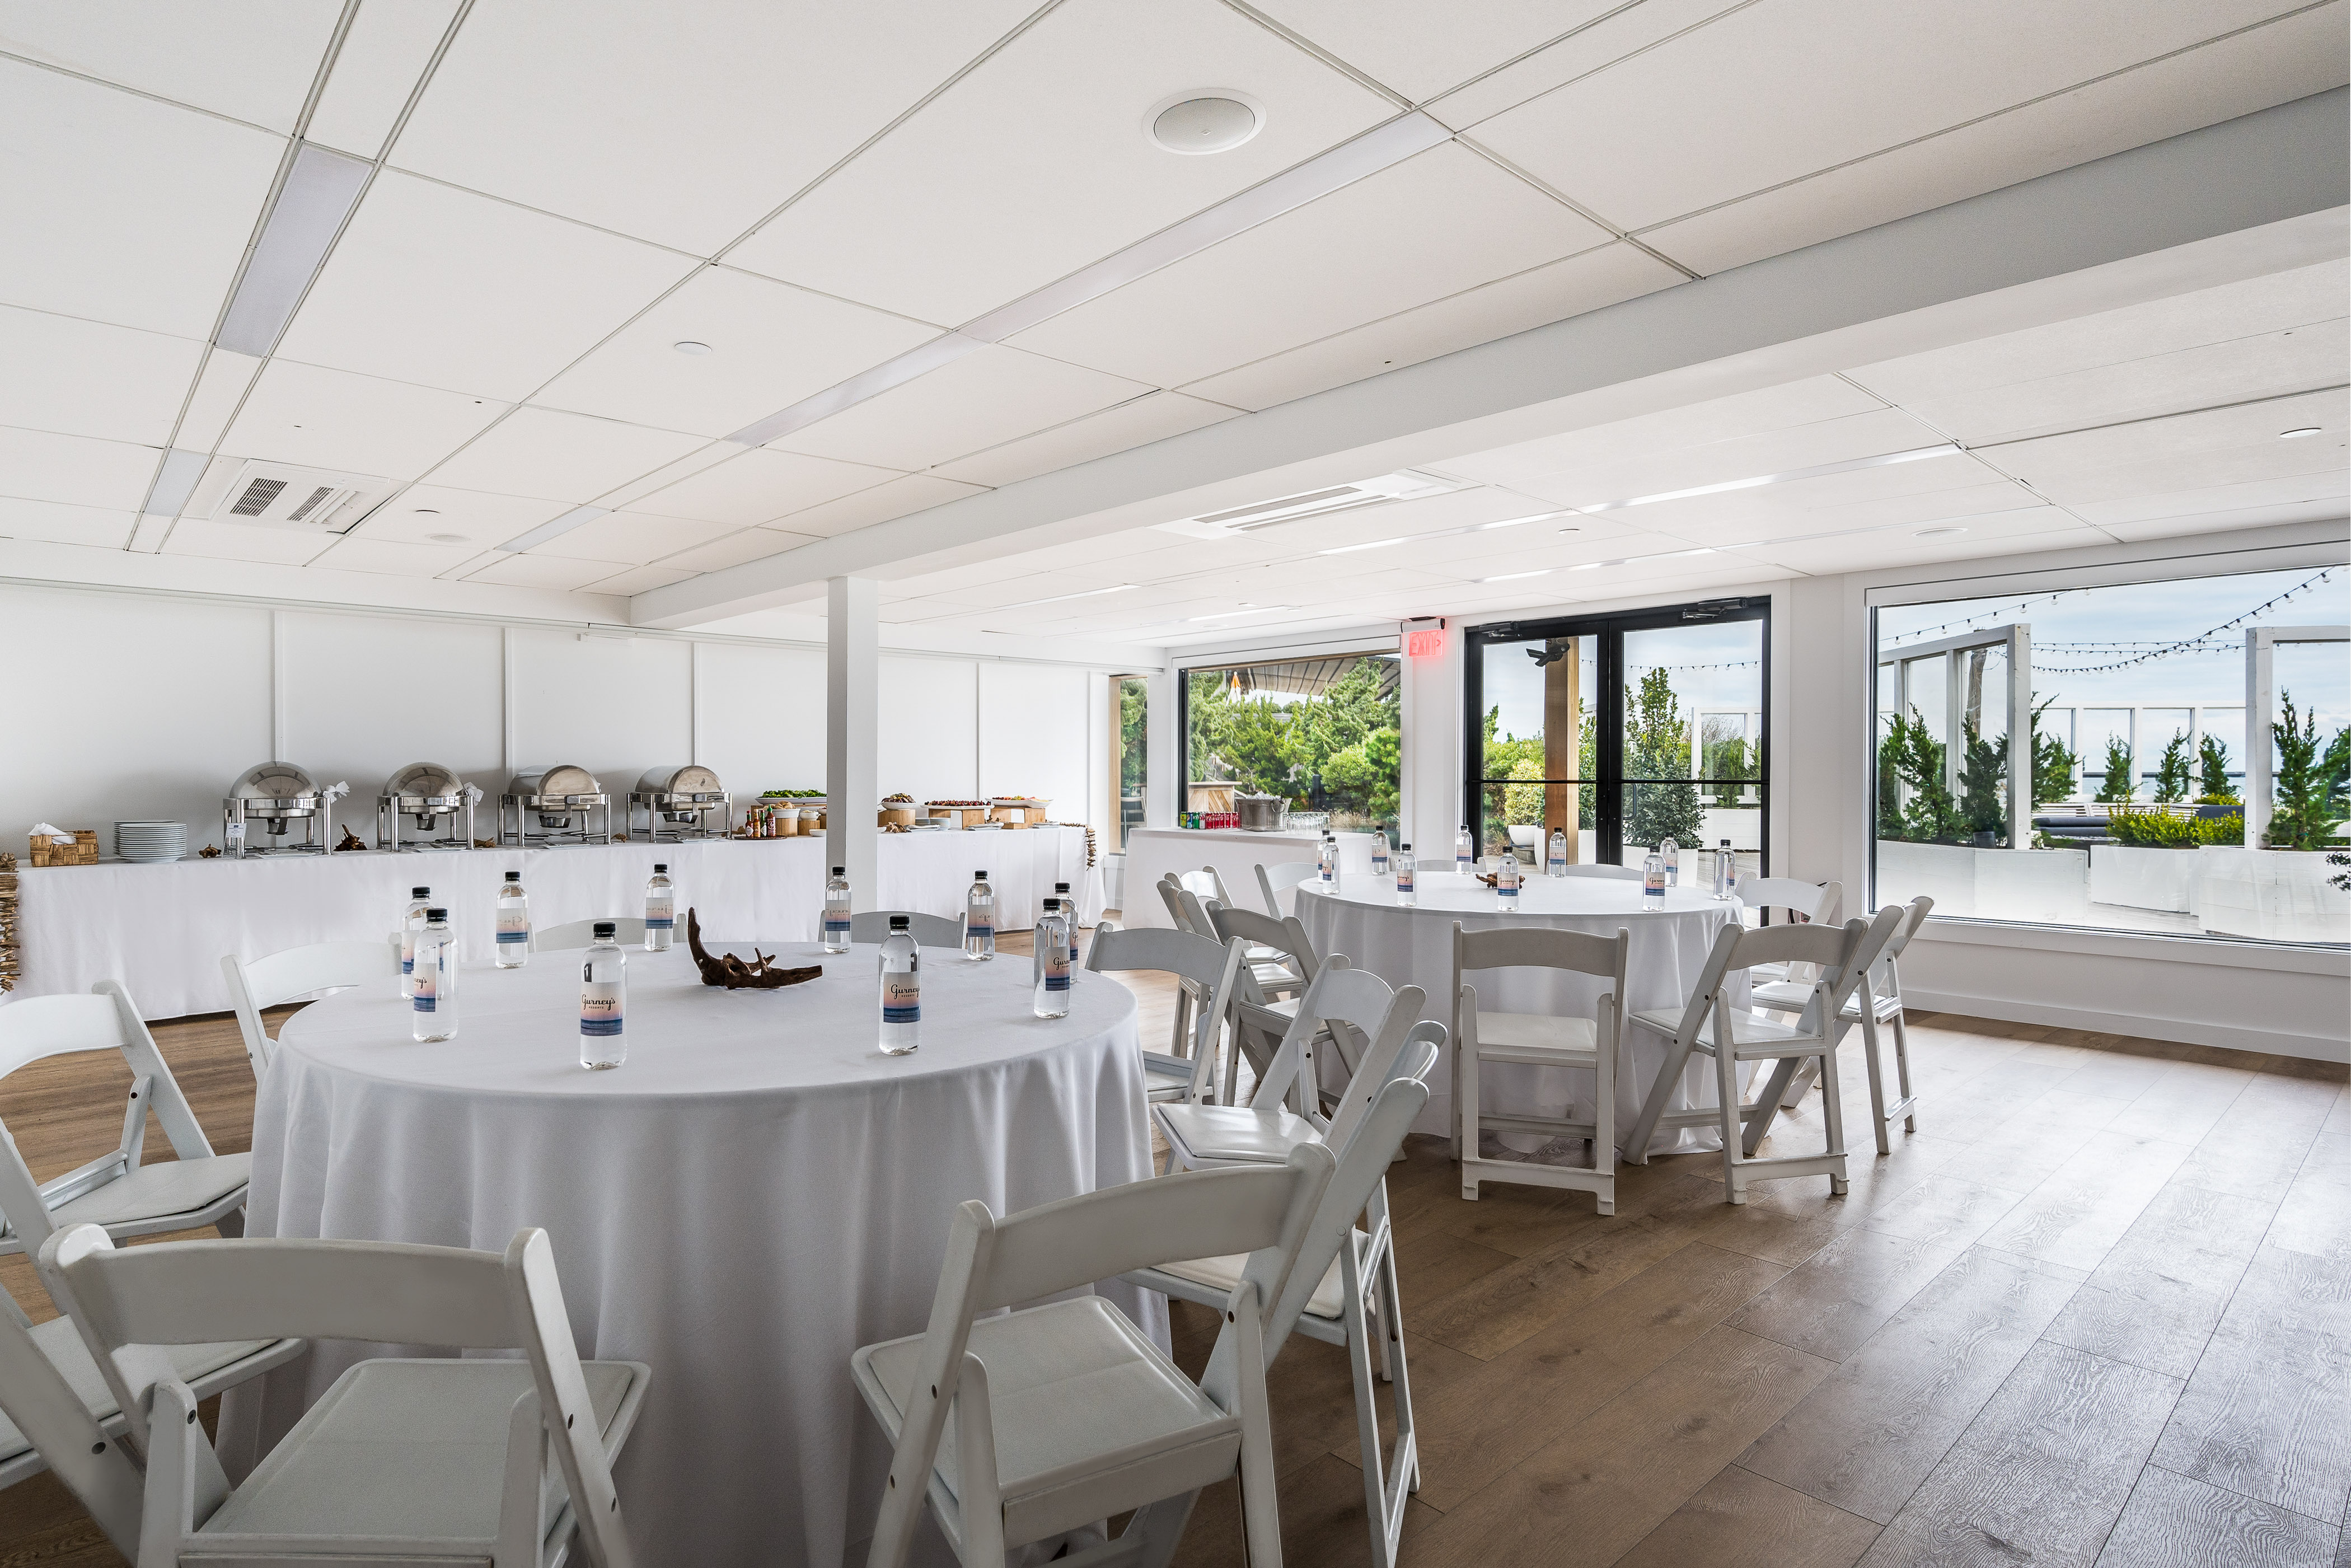 Latitude meeting venue with round top tables, white linens, white chairs and buffet table setup in back.